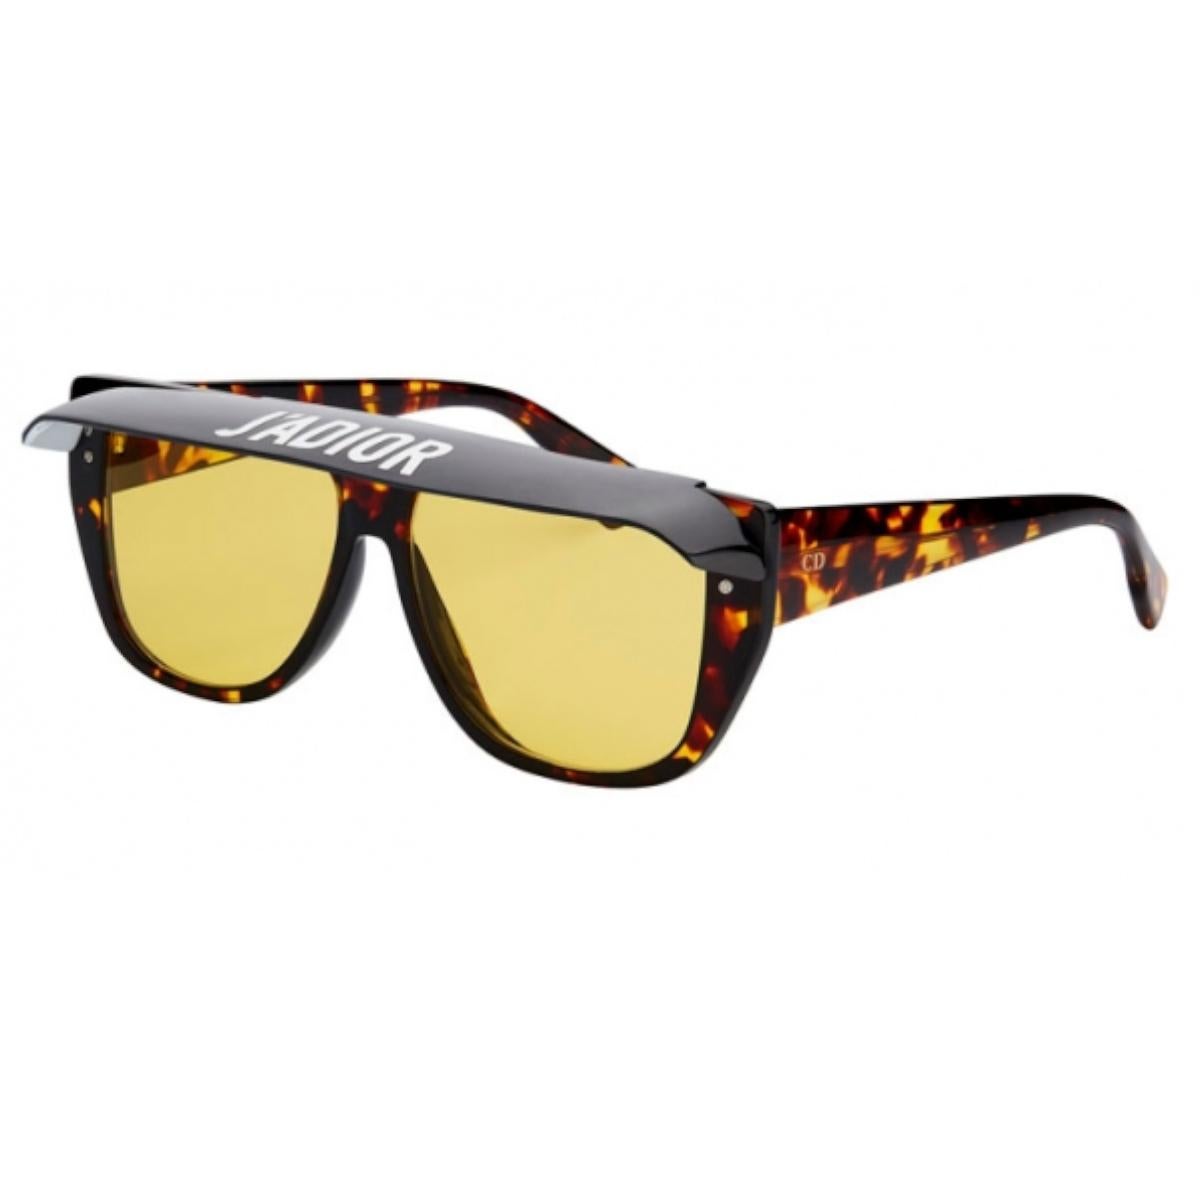 Beautiful and brand new from boutique !
Tortoiseshell frames
Yellow lenses
